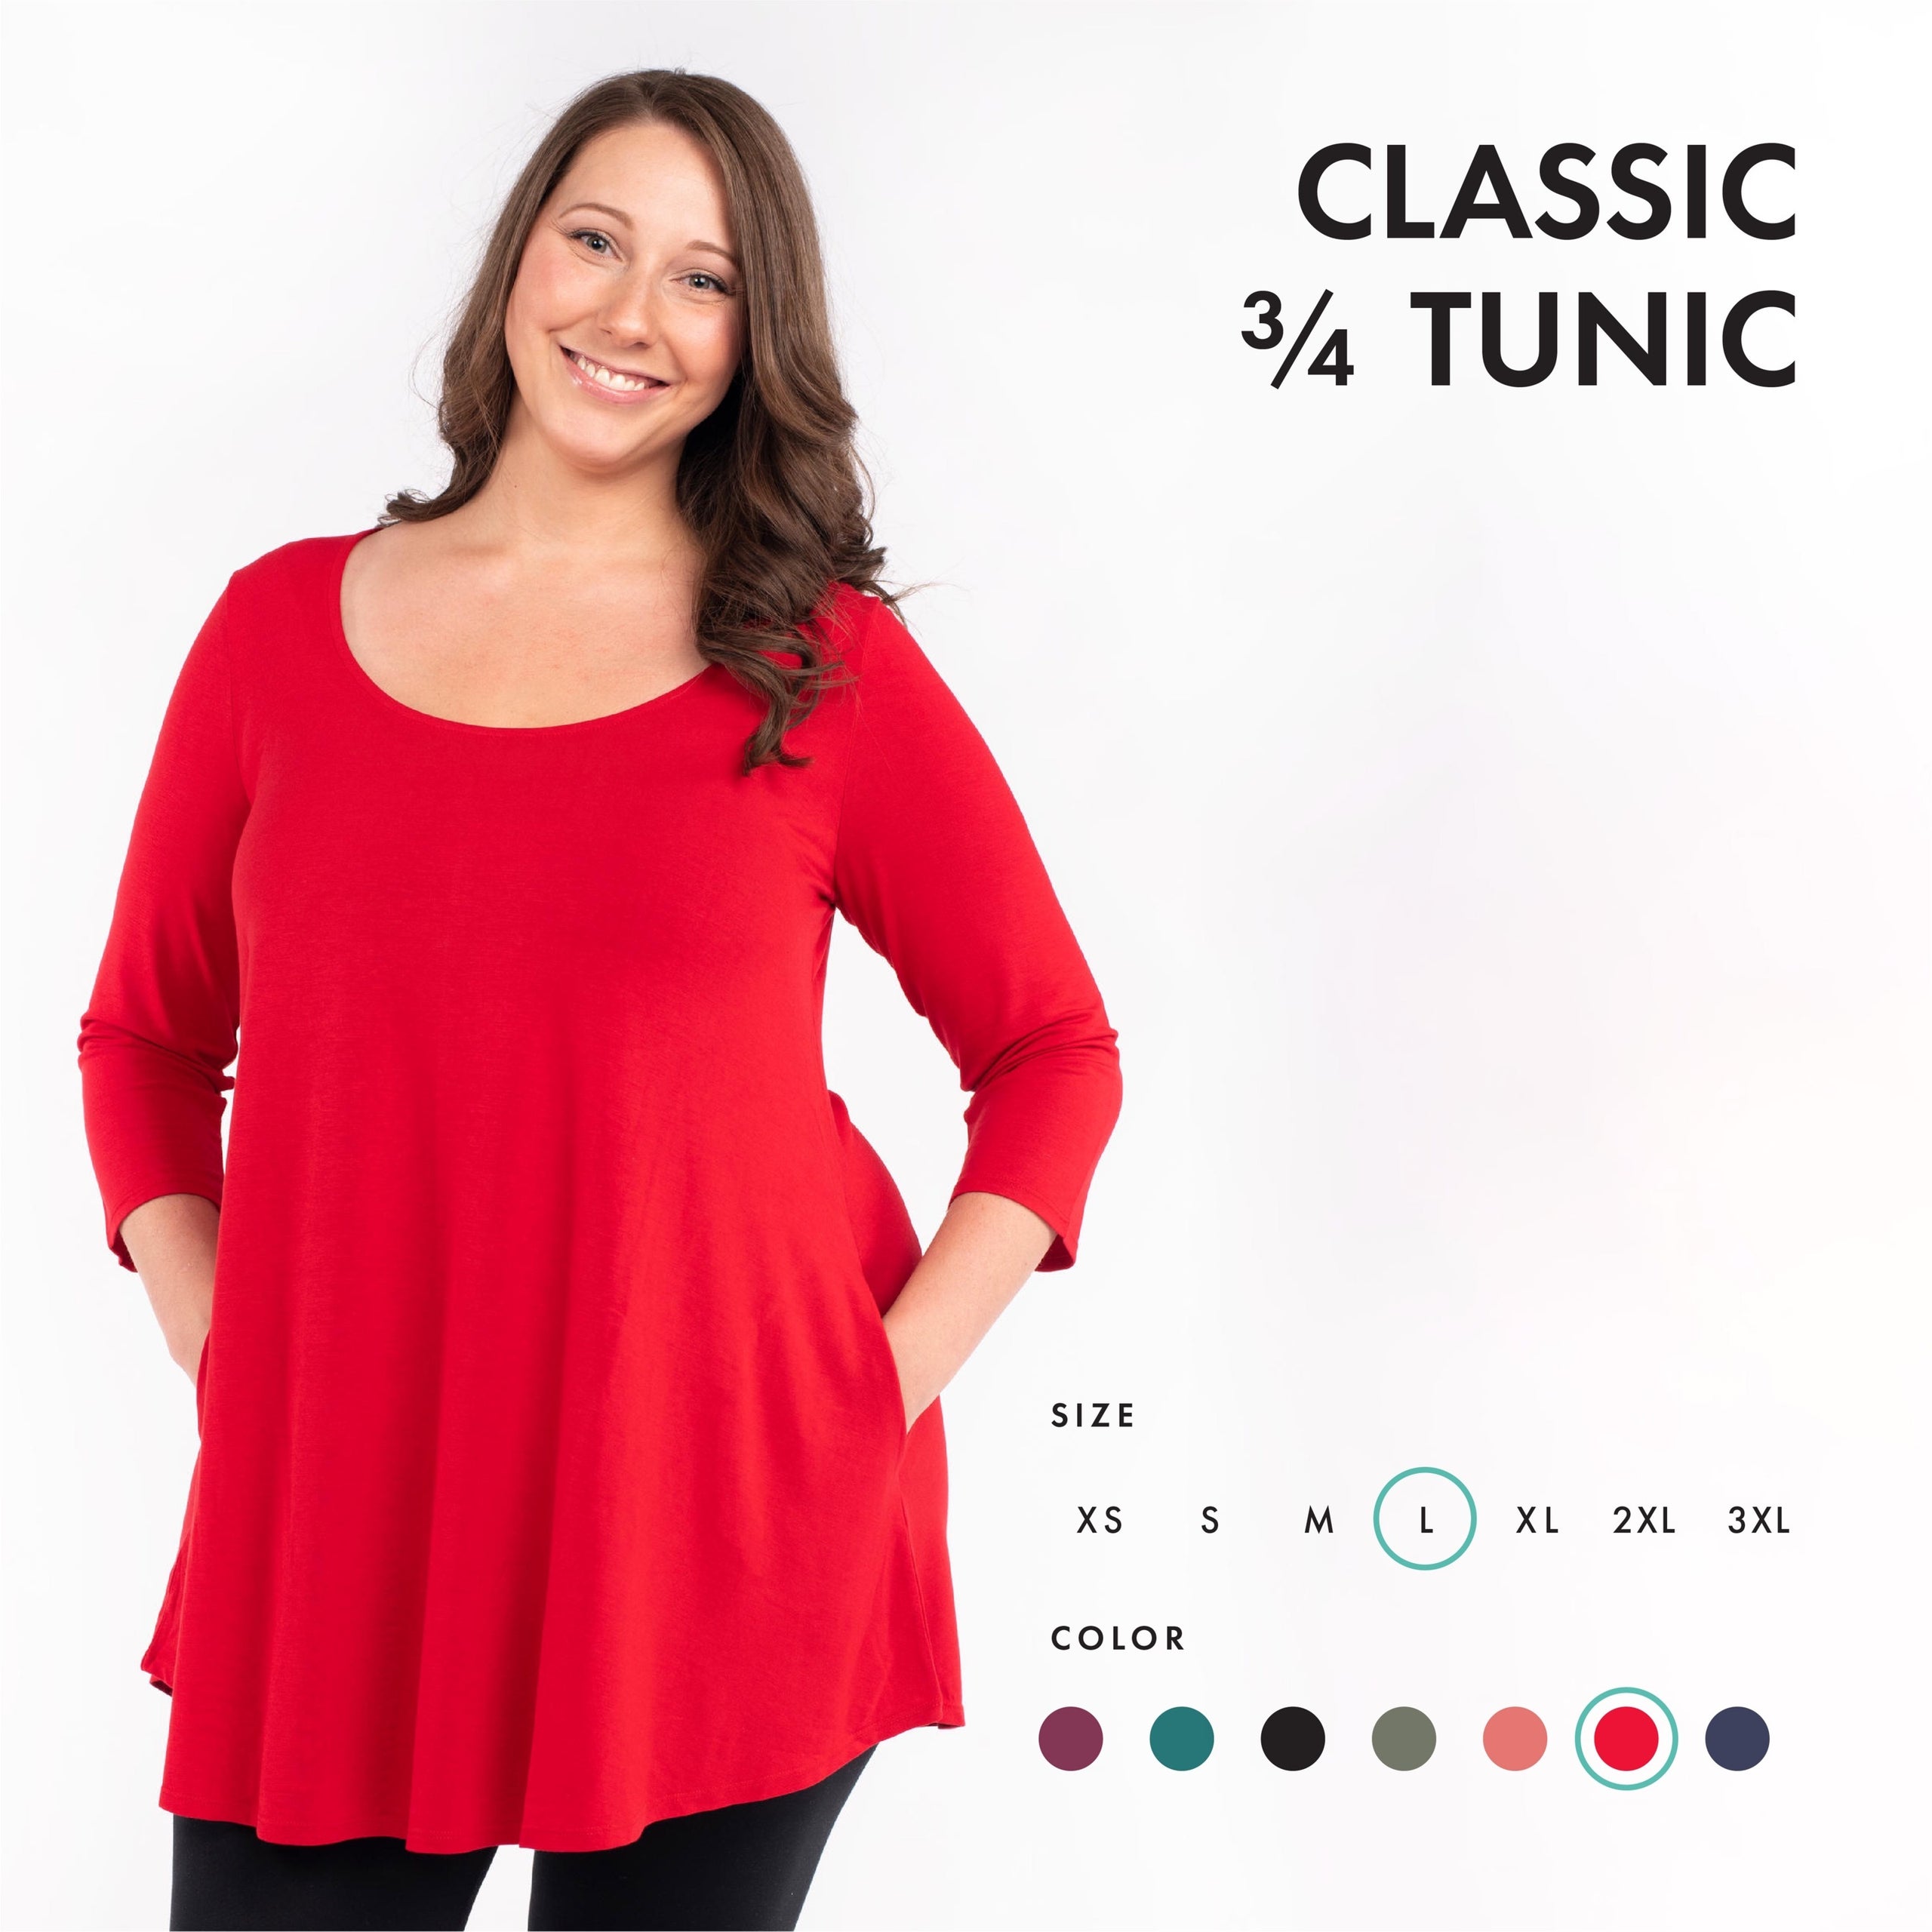 Classic 3/4 Tunic - Scarlet  SweetLegs New Westminster with Katerina